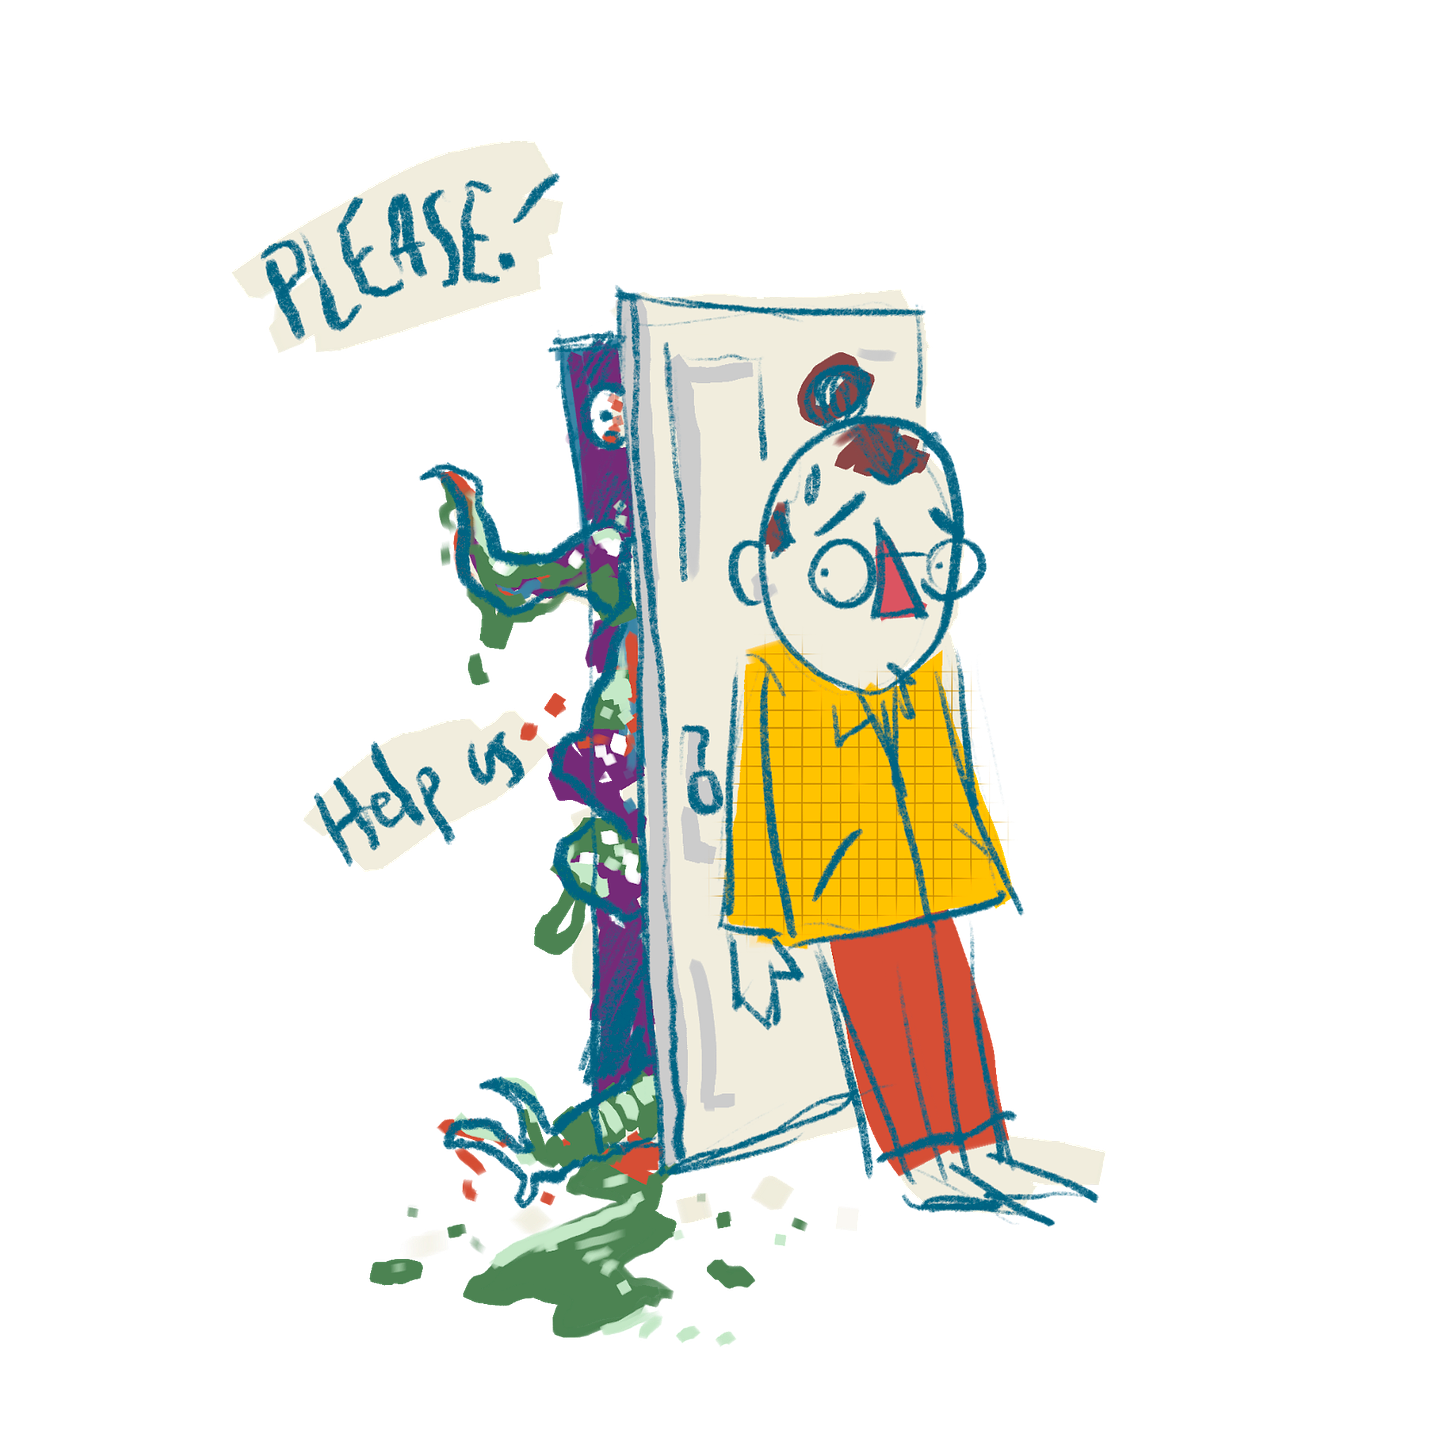 An illustration of me leaning on a door while a bunch of spooky monster parts try to push their way through. They say "please!" and "Help us!" It's a pretty simple metaphor about the unfinished projects hiding in my proverbial closet.